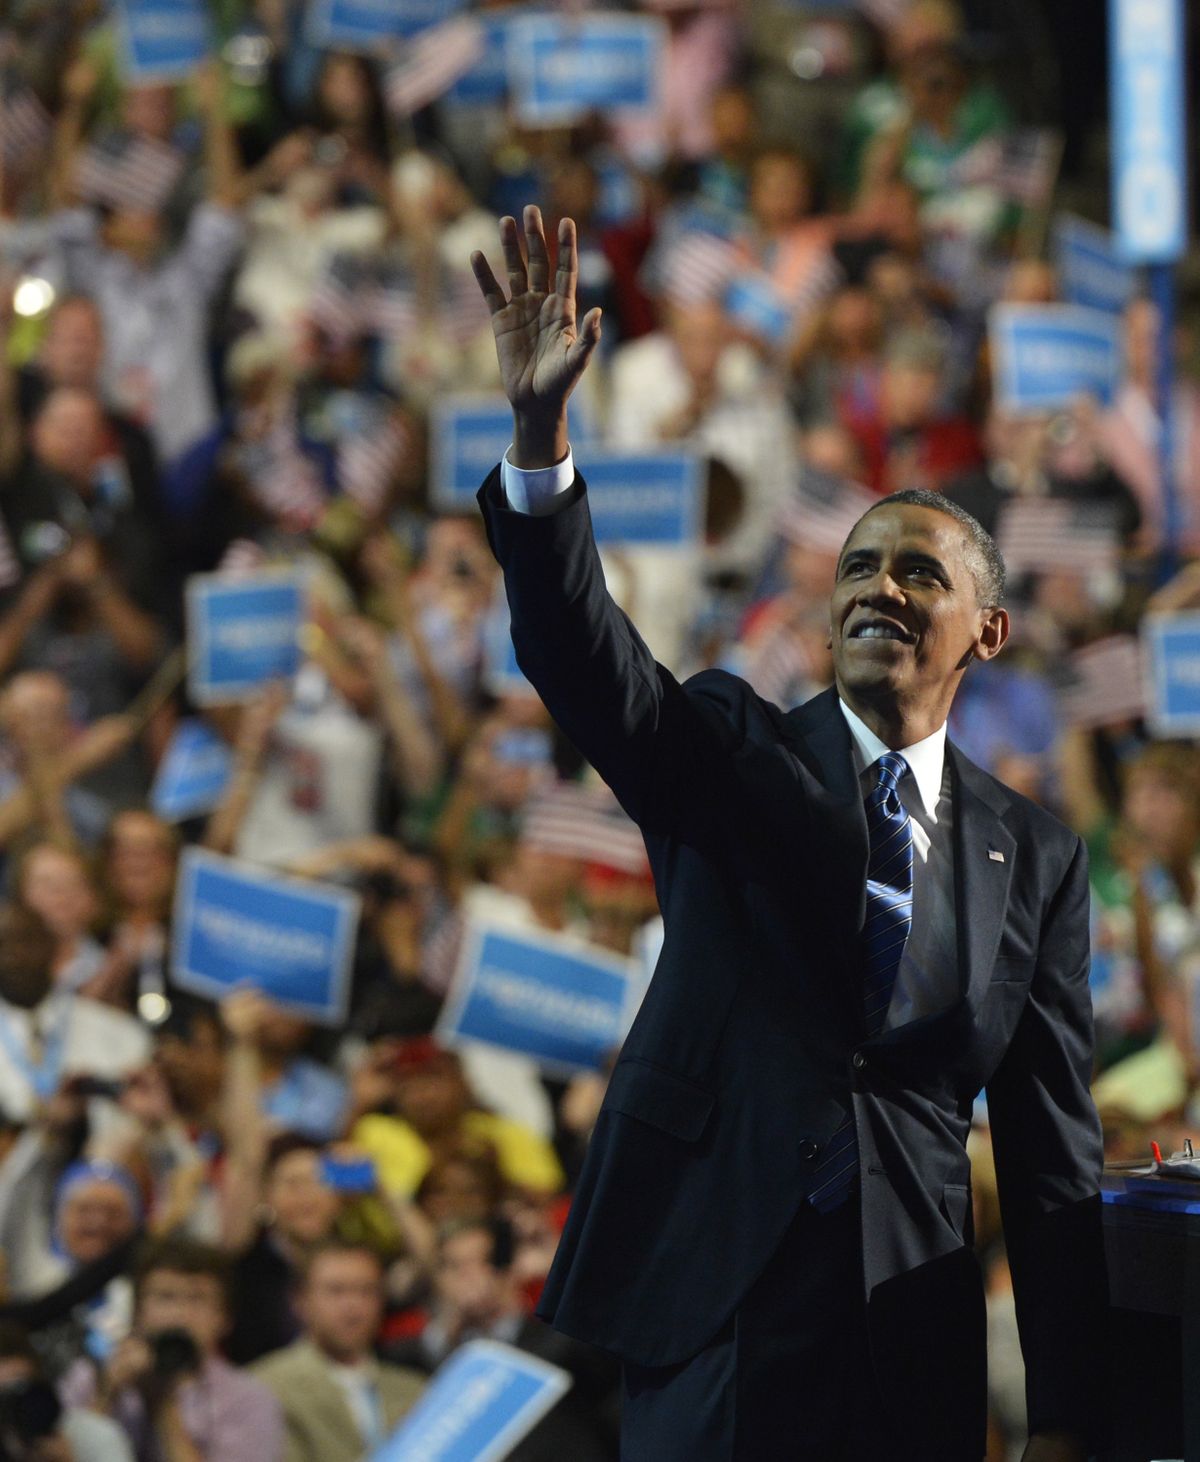 President Barack Obama waves to the delegation after his speech at Time Warner Cable Arena in Charlotte, N.C., on Thursday.